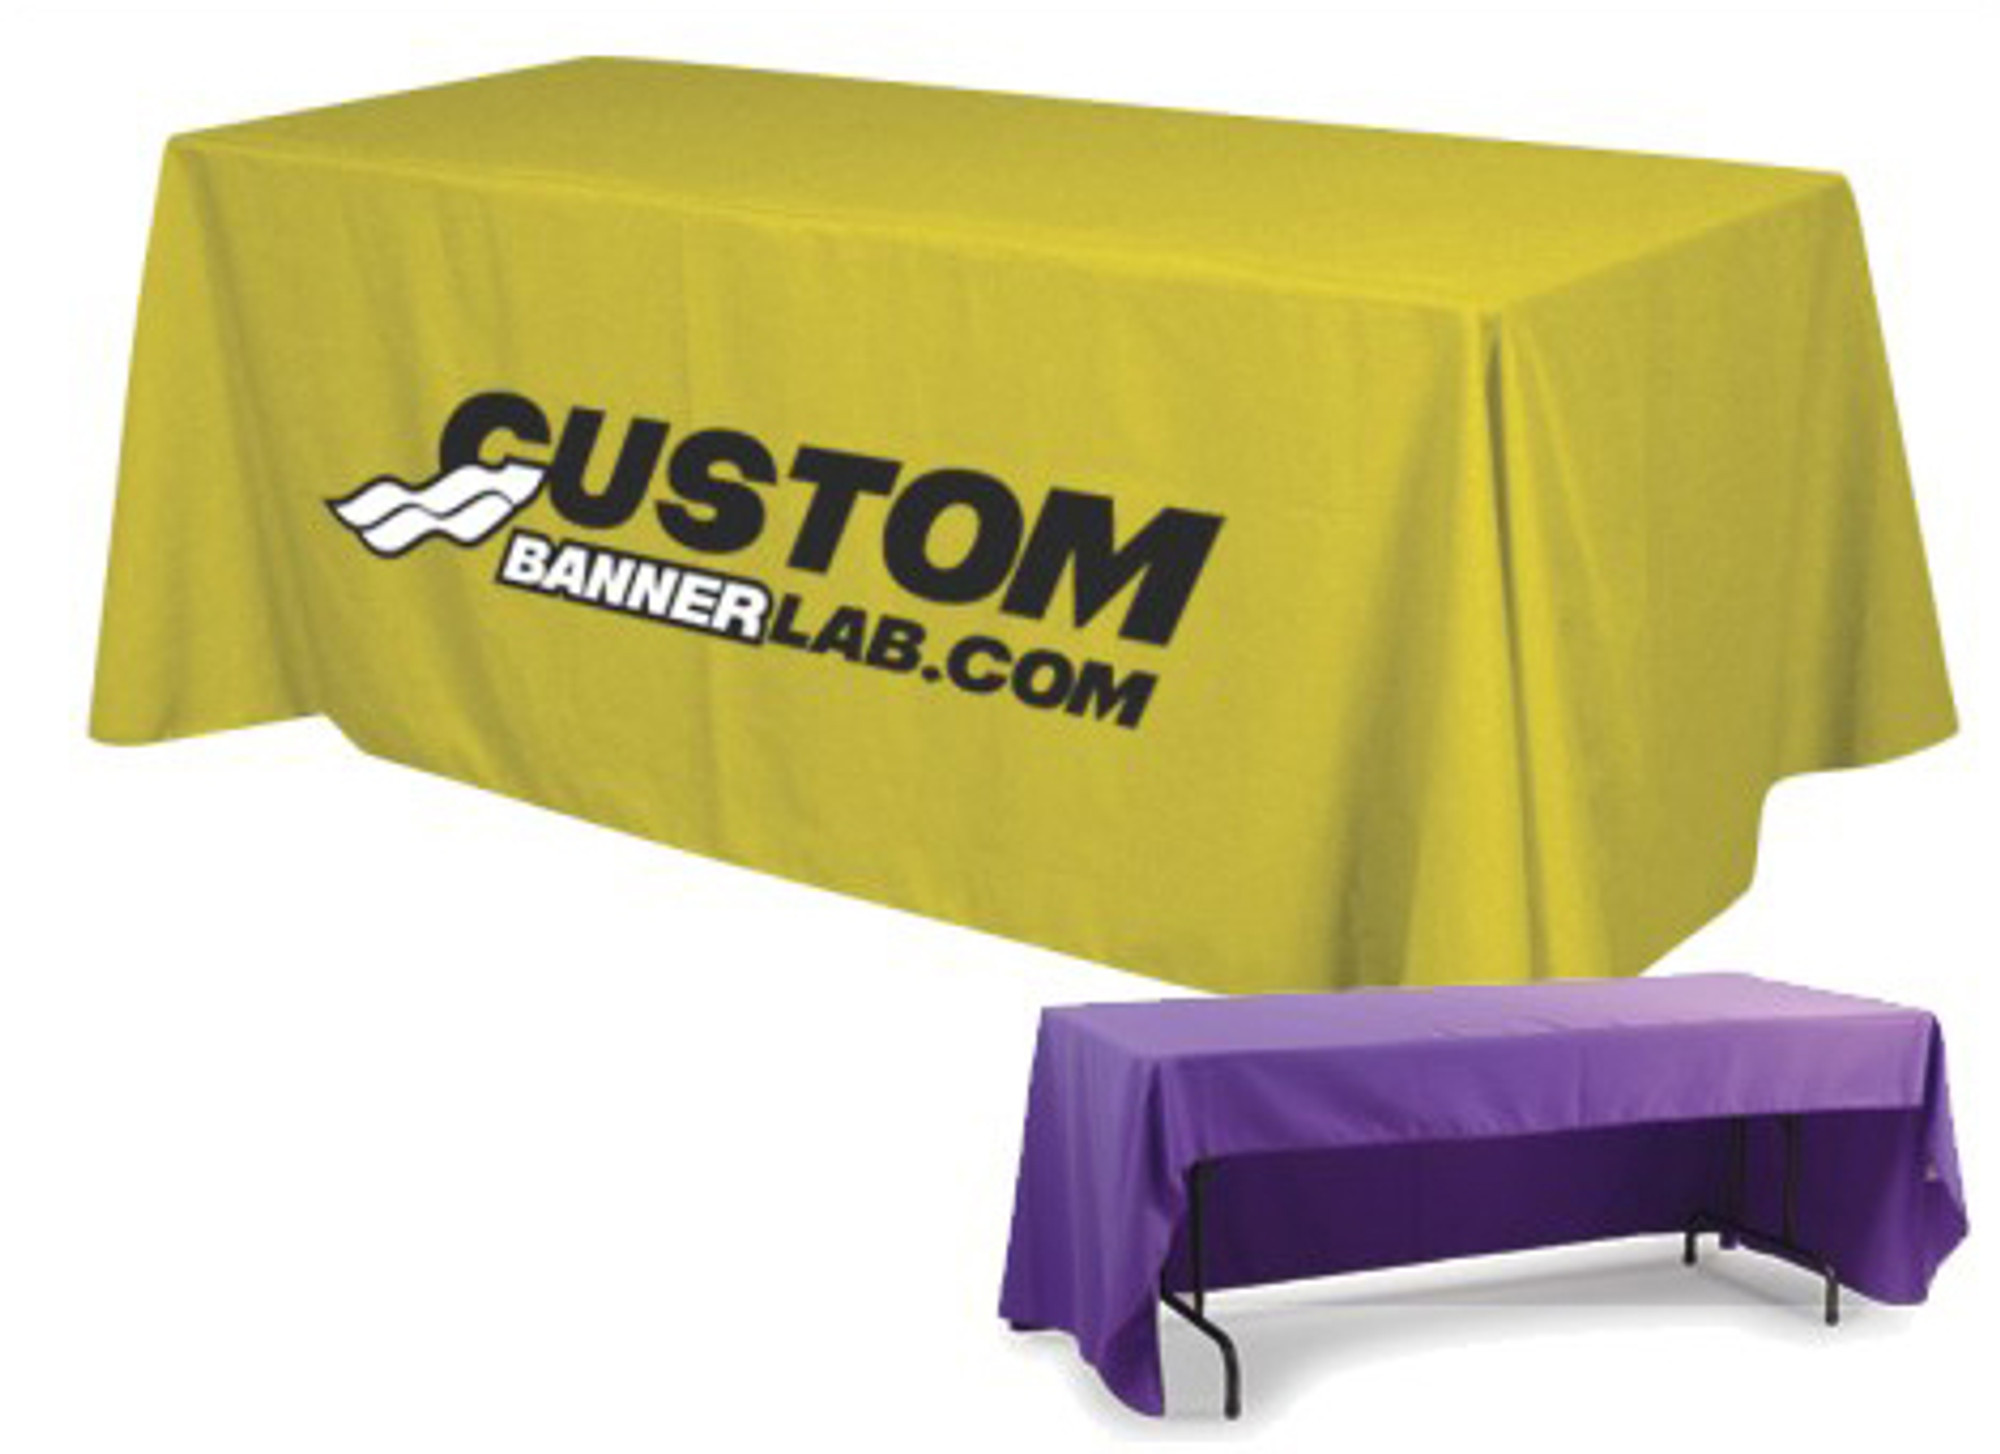 Washable! 8ft Business Name Printed Table Cloth with your logo photo or art 